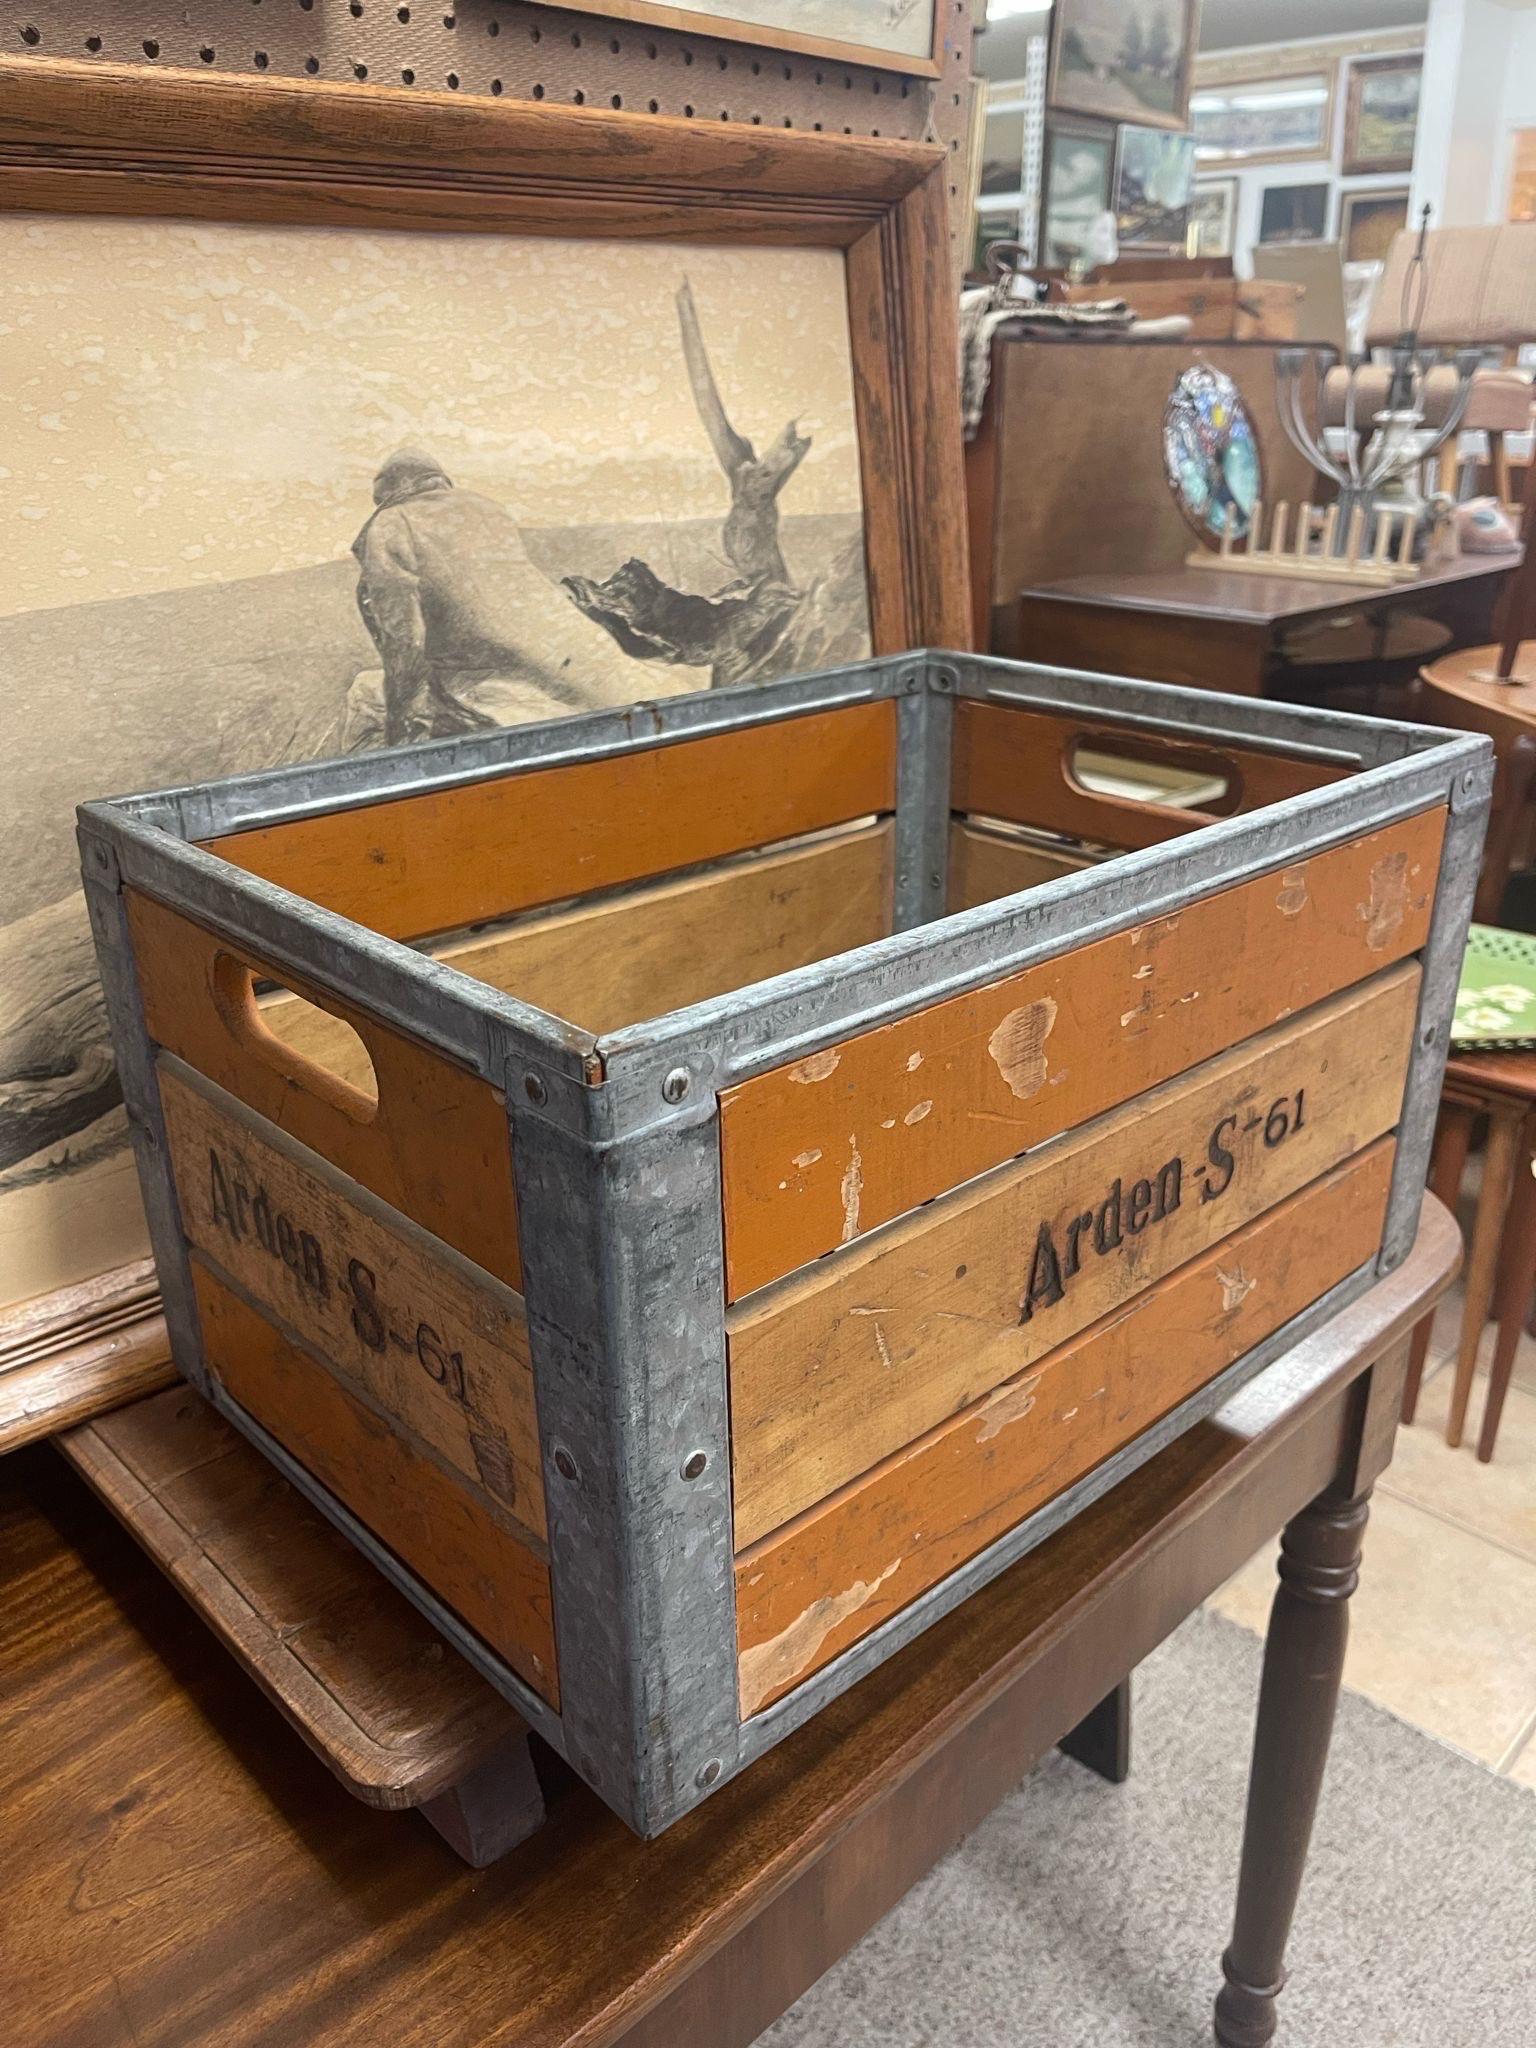 Circa 1961. Ardent Forms Metal and wood Crate. Wording has been embossed into the wood.Rustic vintage. Vintage Condition Consistent with Age as Pictured.

Dimensions. 19 W ; 13 D ; 10 1/2 H